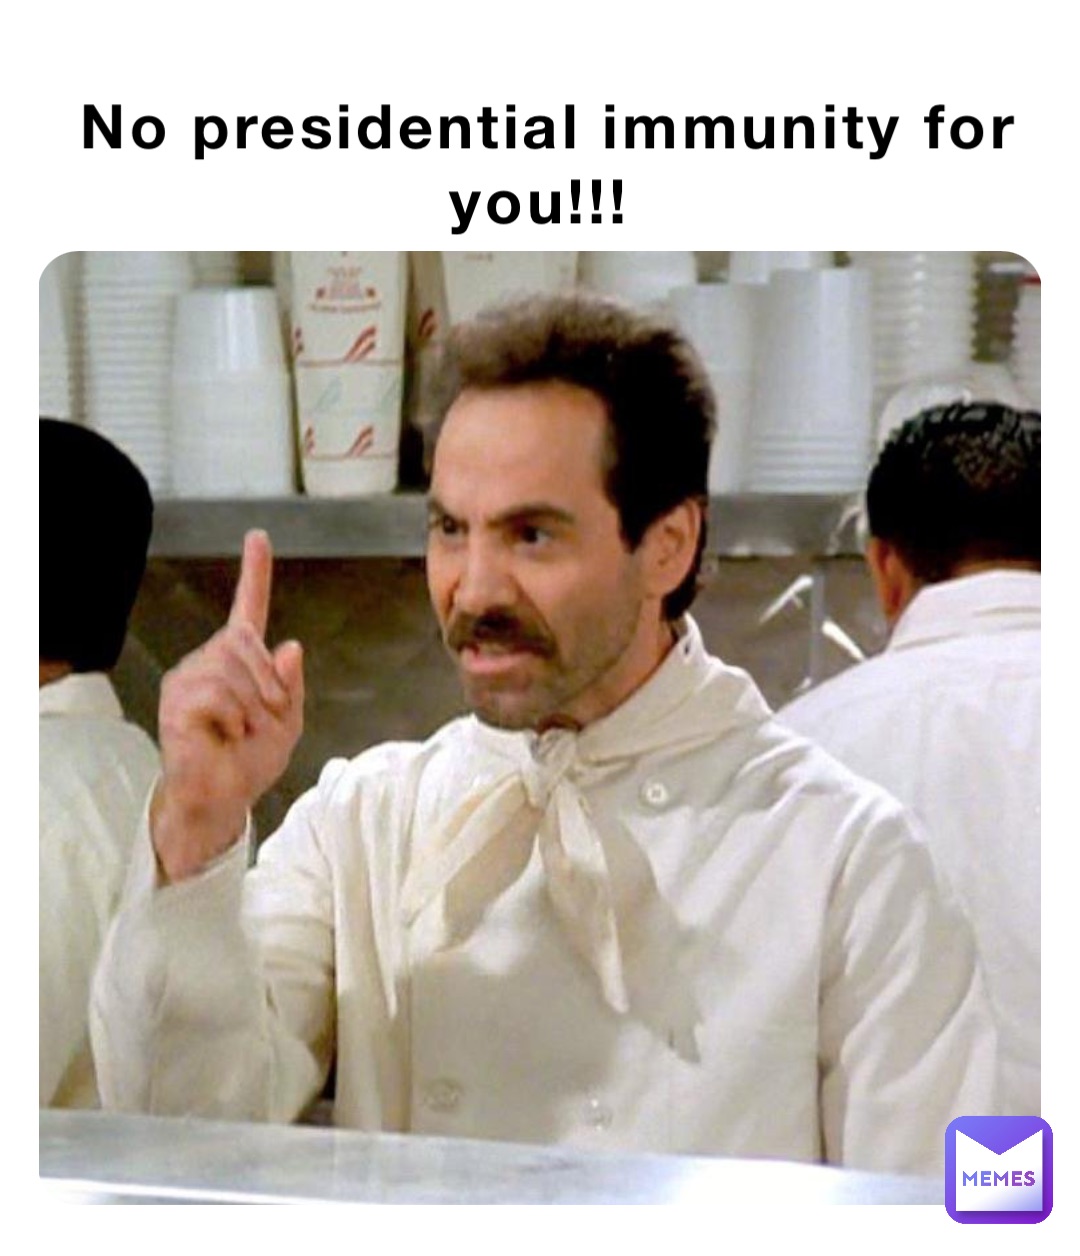 No presidential immunity for you!!!